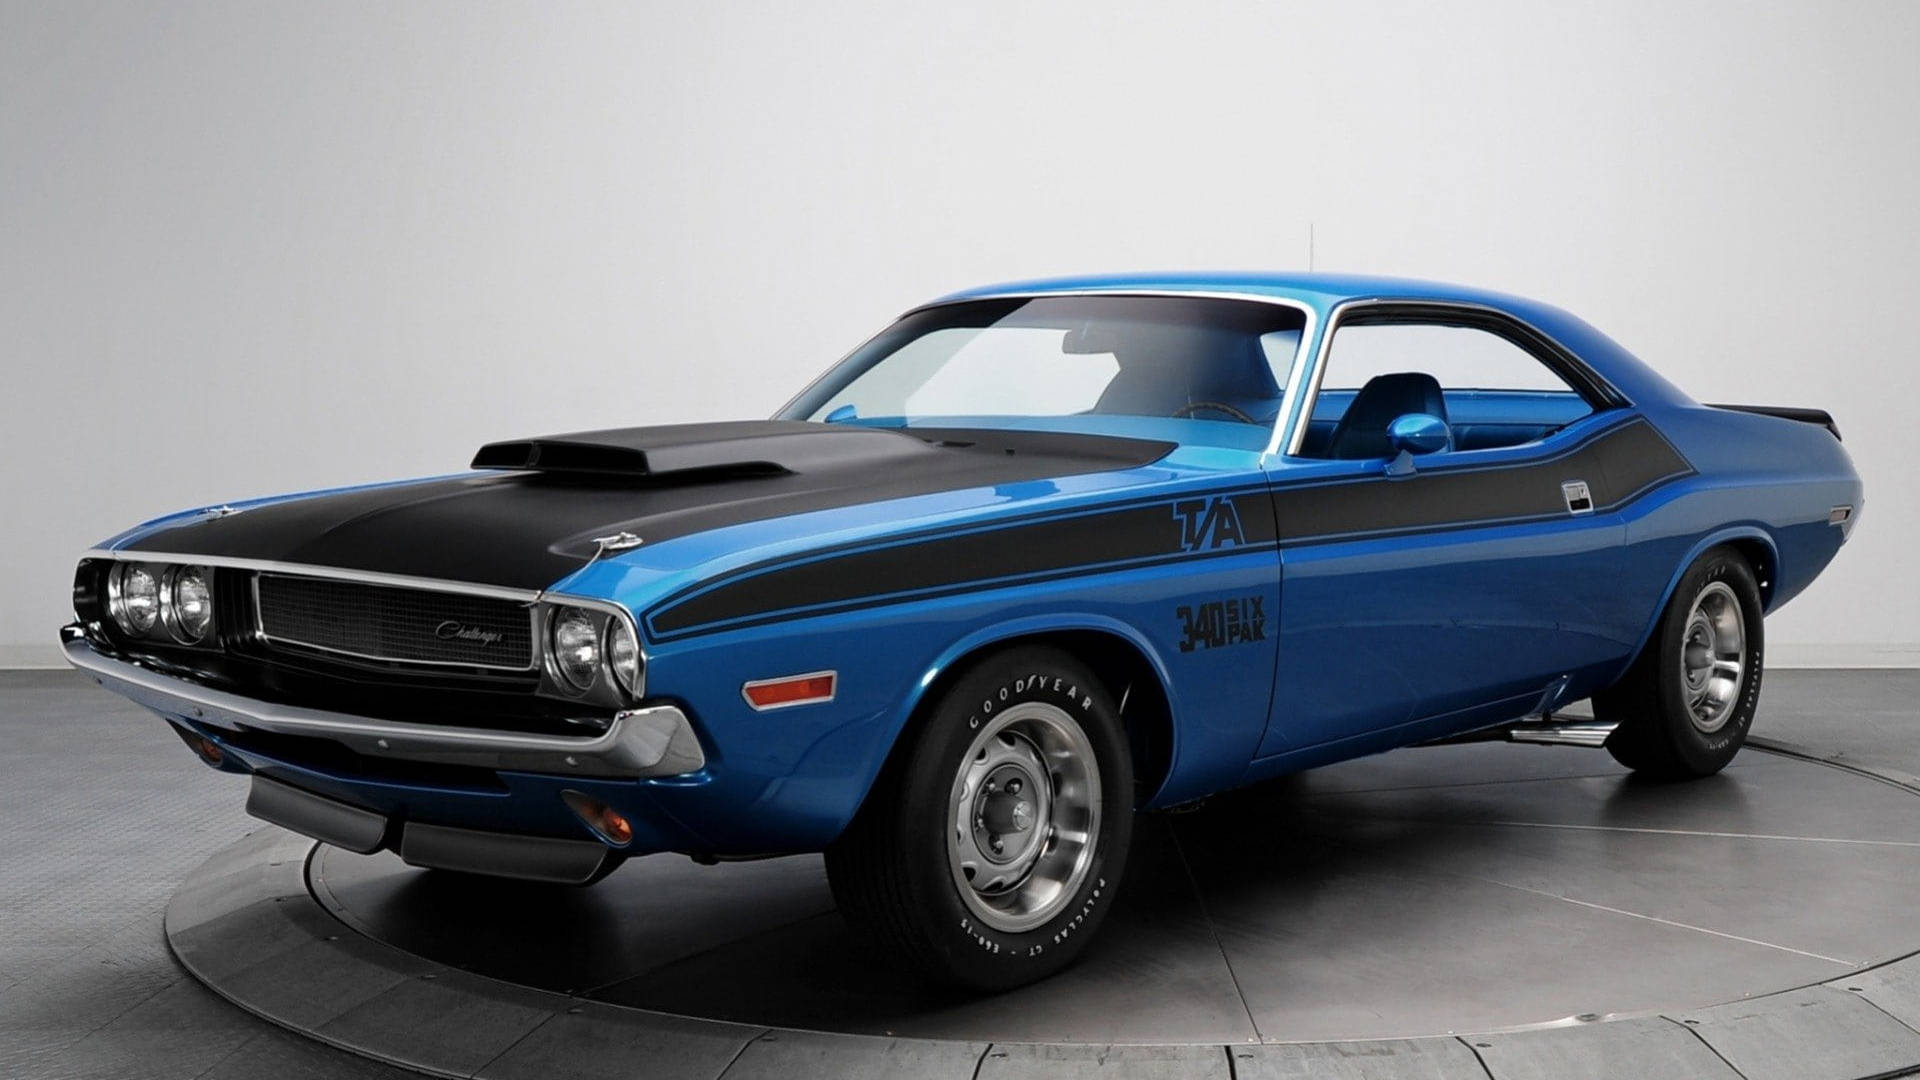 Striking Blue Dodge Challenger From 1970 Showcasing At A Car Enthusiast Event. Wallpaper